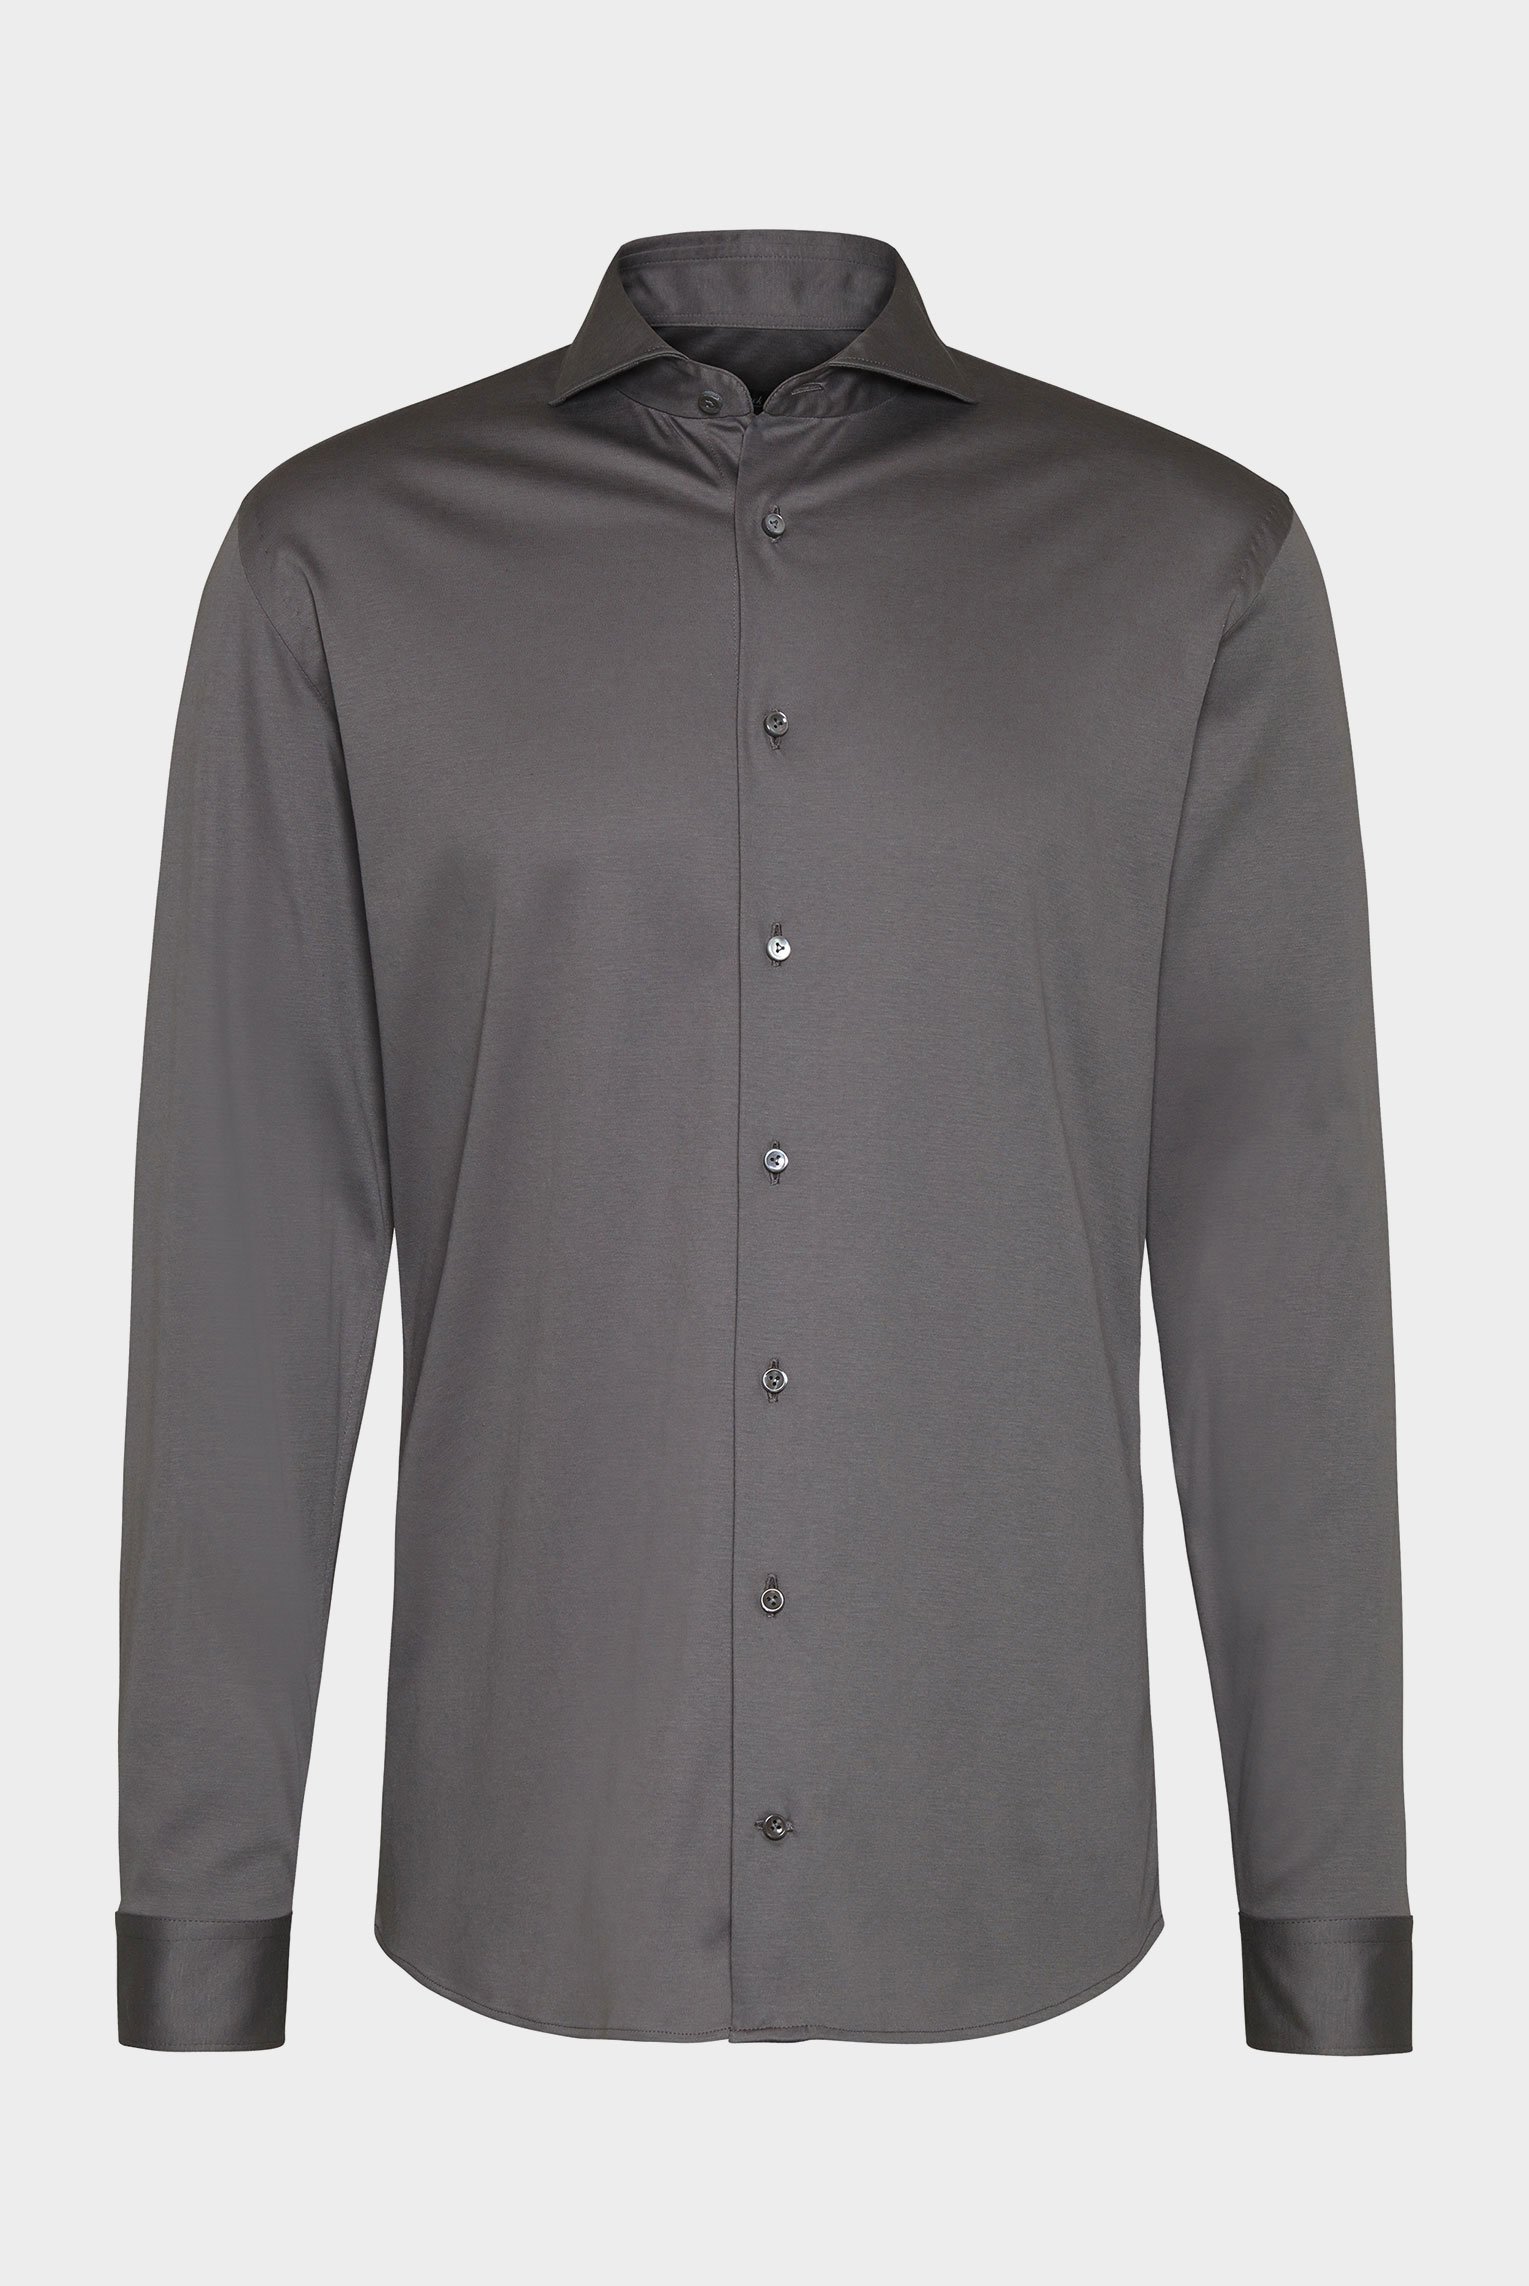 Casual Shirts+Jersey Shirt Swiss Cotton Tailor Fit+20.1683.UC.180031.070.X4L